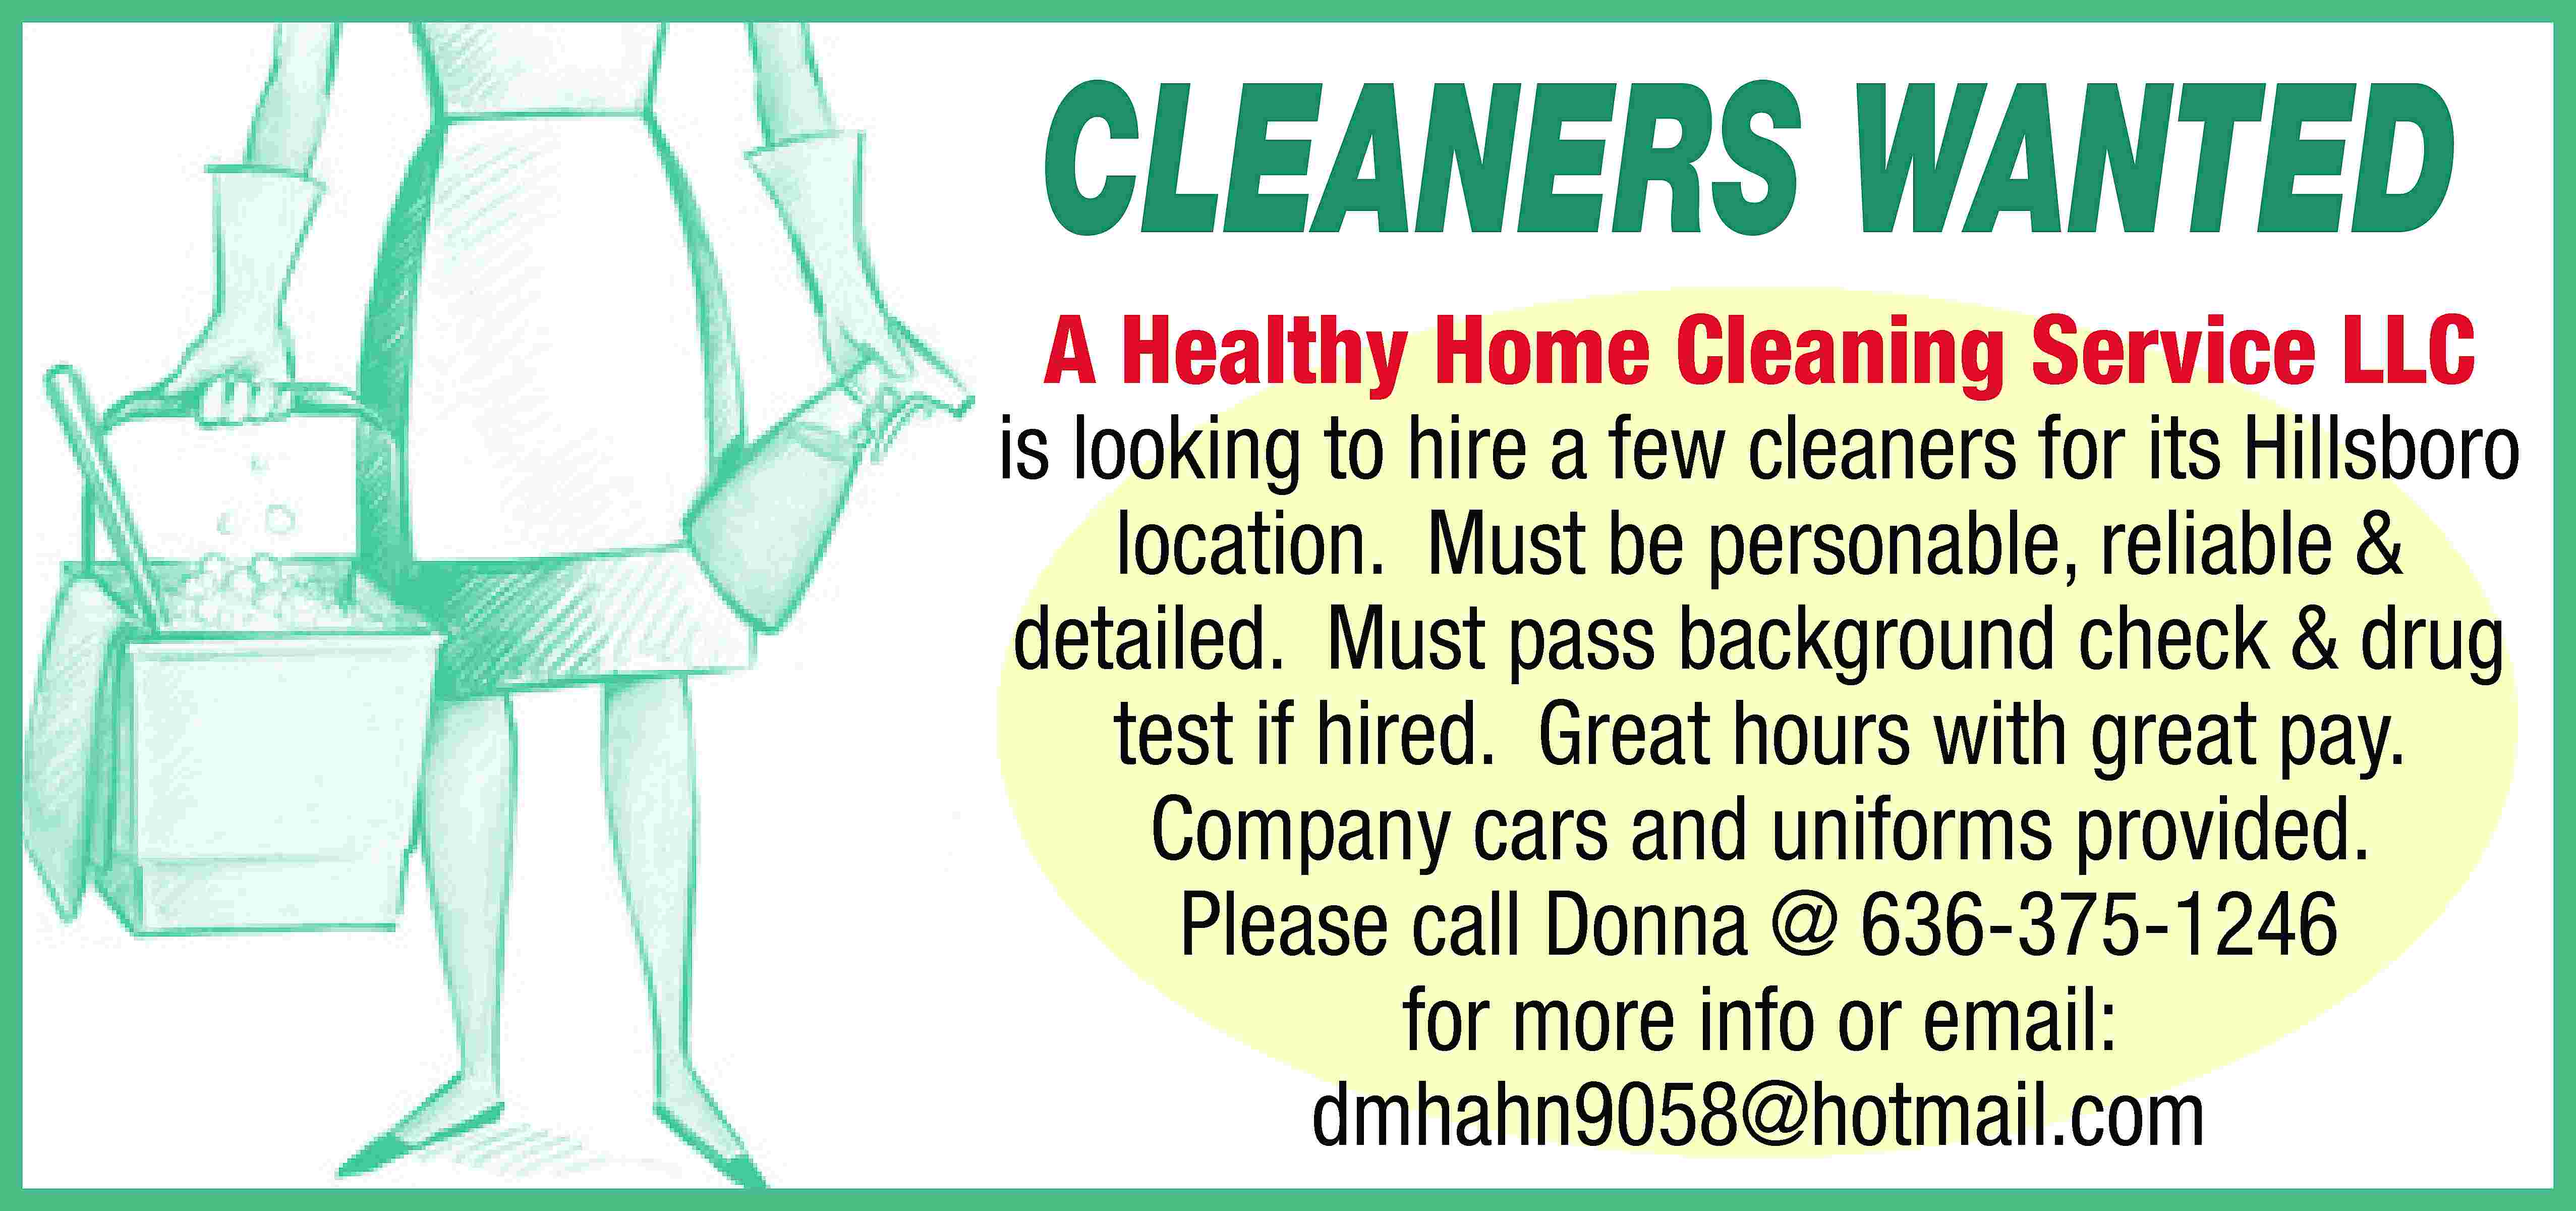 CLEANERS WANTED A Healthy Home  CLEANERS WANTED A Healthy Home Cleaning Service LLC is looking to hire a few cleaners for its Hillsboro location. Must be personable, reliable & detailed. Must pass background check & drug test if hired. Great hours with great pay. Company cars and uniforms provided. Please call Donna @ 636-375-1246 for more info or email: dmhahn9058@hotmail.com